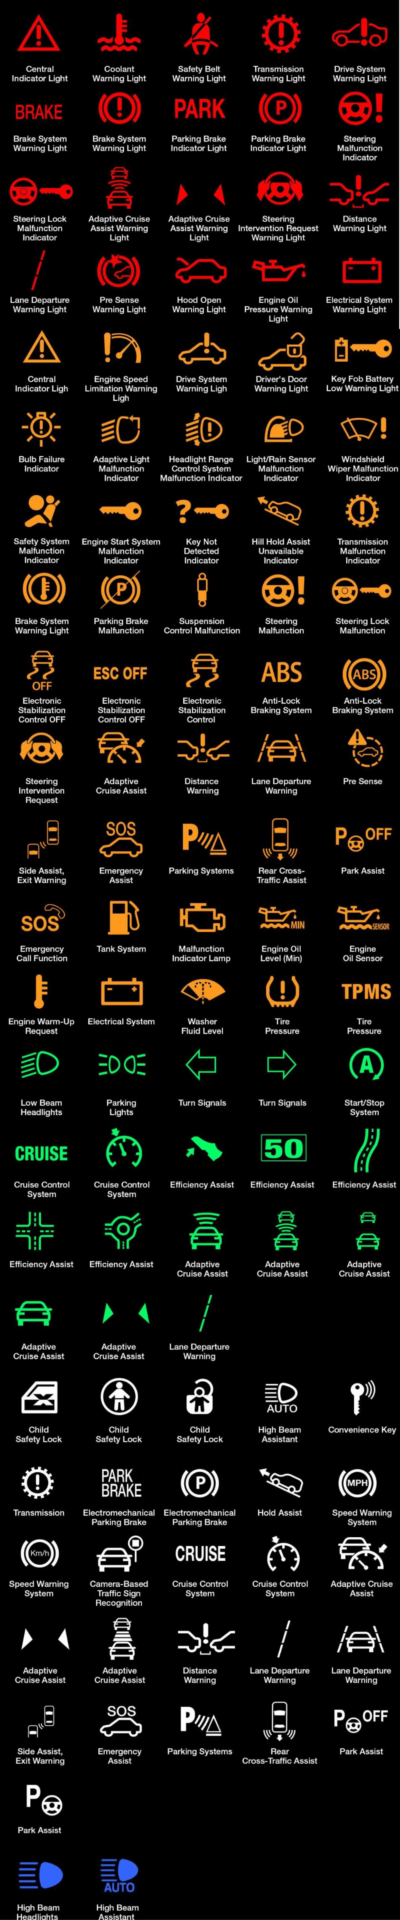 Nissan Frontier dashboard symbols and meanings